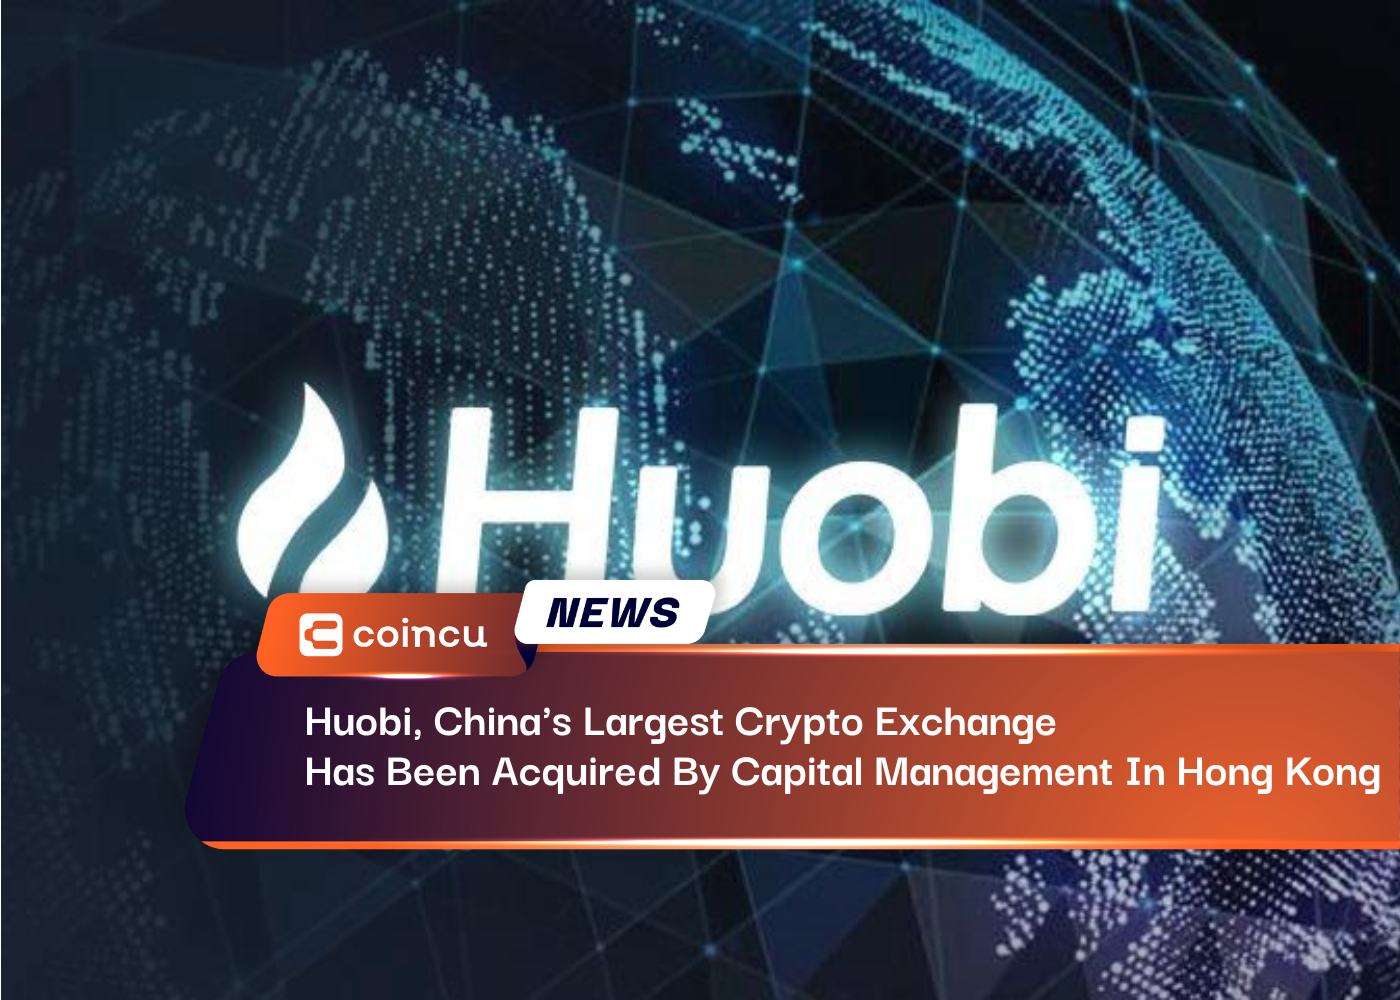 Huobi, China's Largest Crypto Exchange Has Been Acquired By Capital Management In Hong Kong